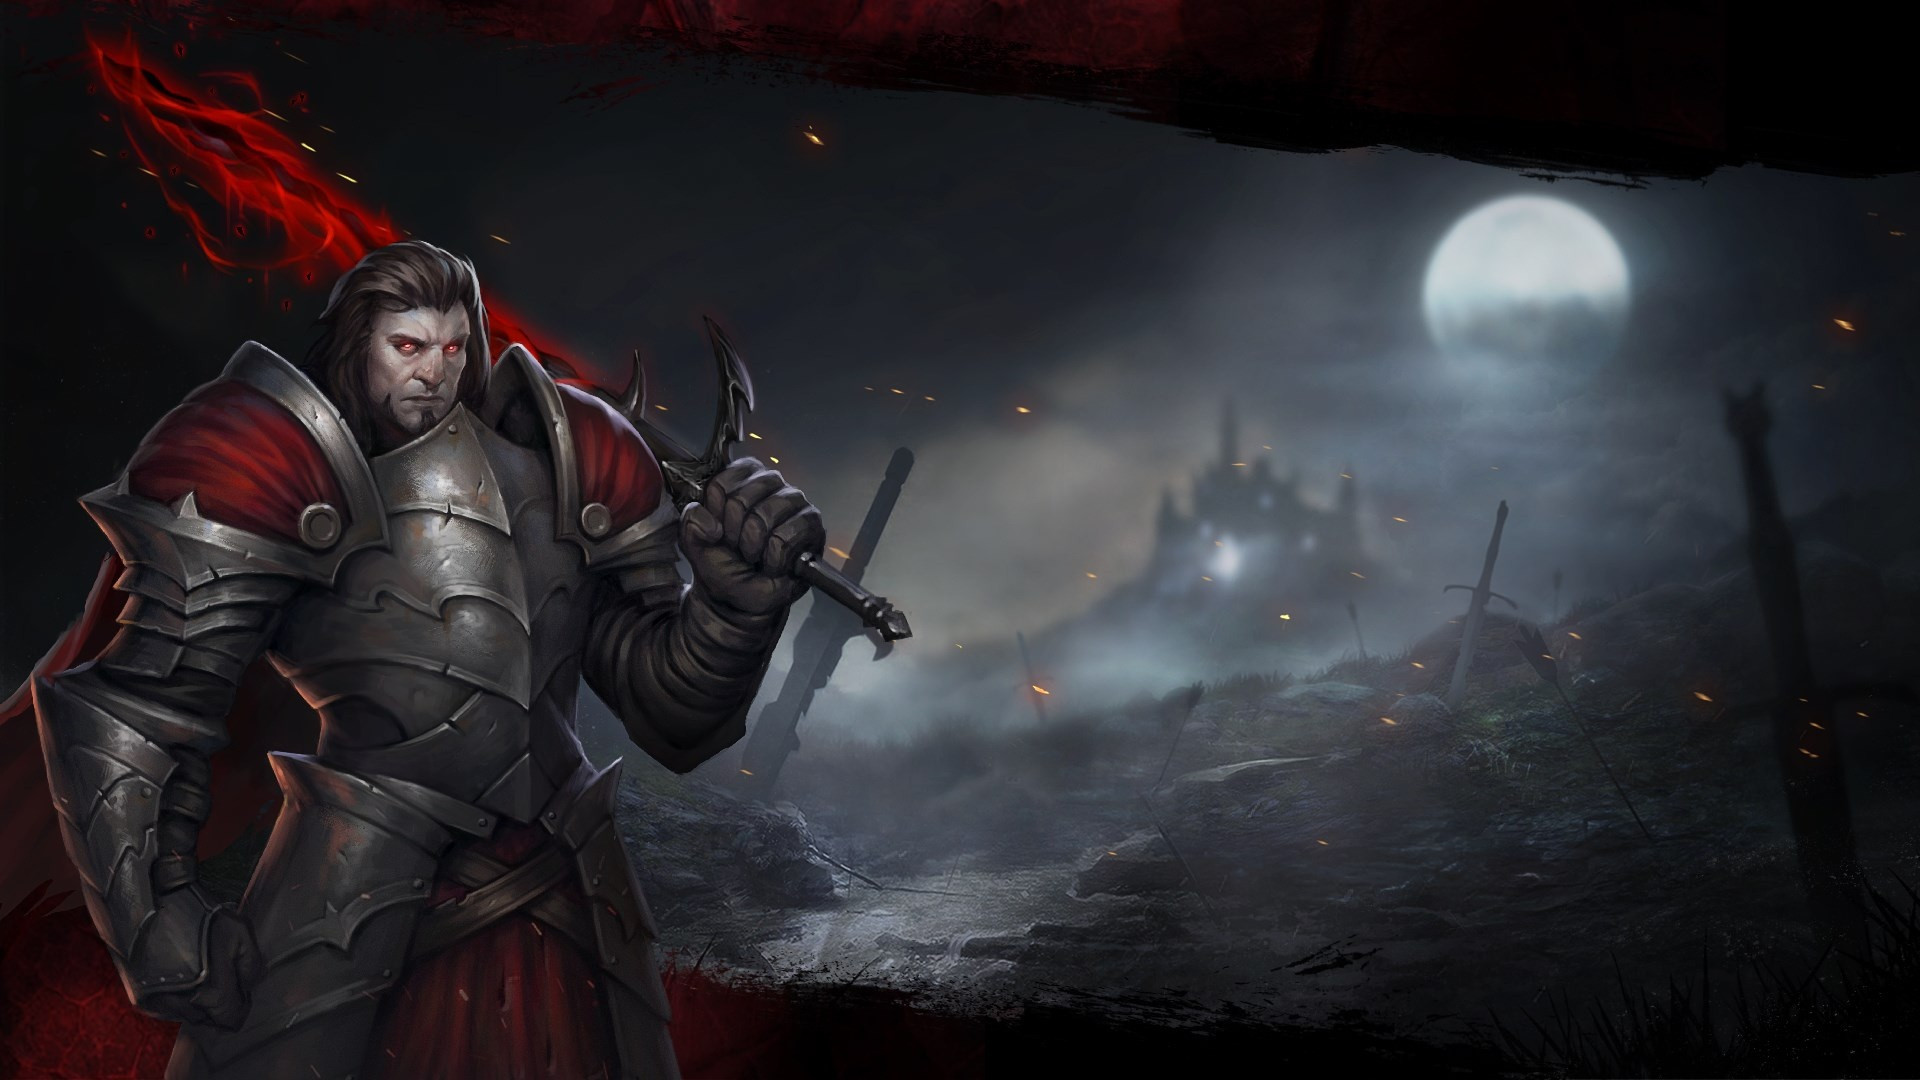 Sink Your Teeth into Immortal Realms: Vampire Wars (Game Preview) Today on Xbox One